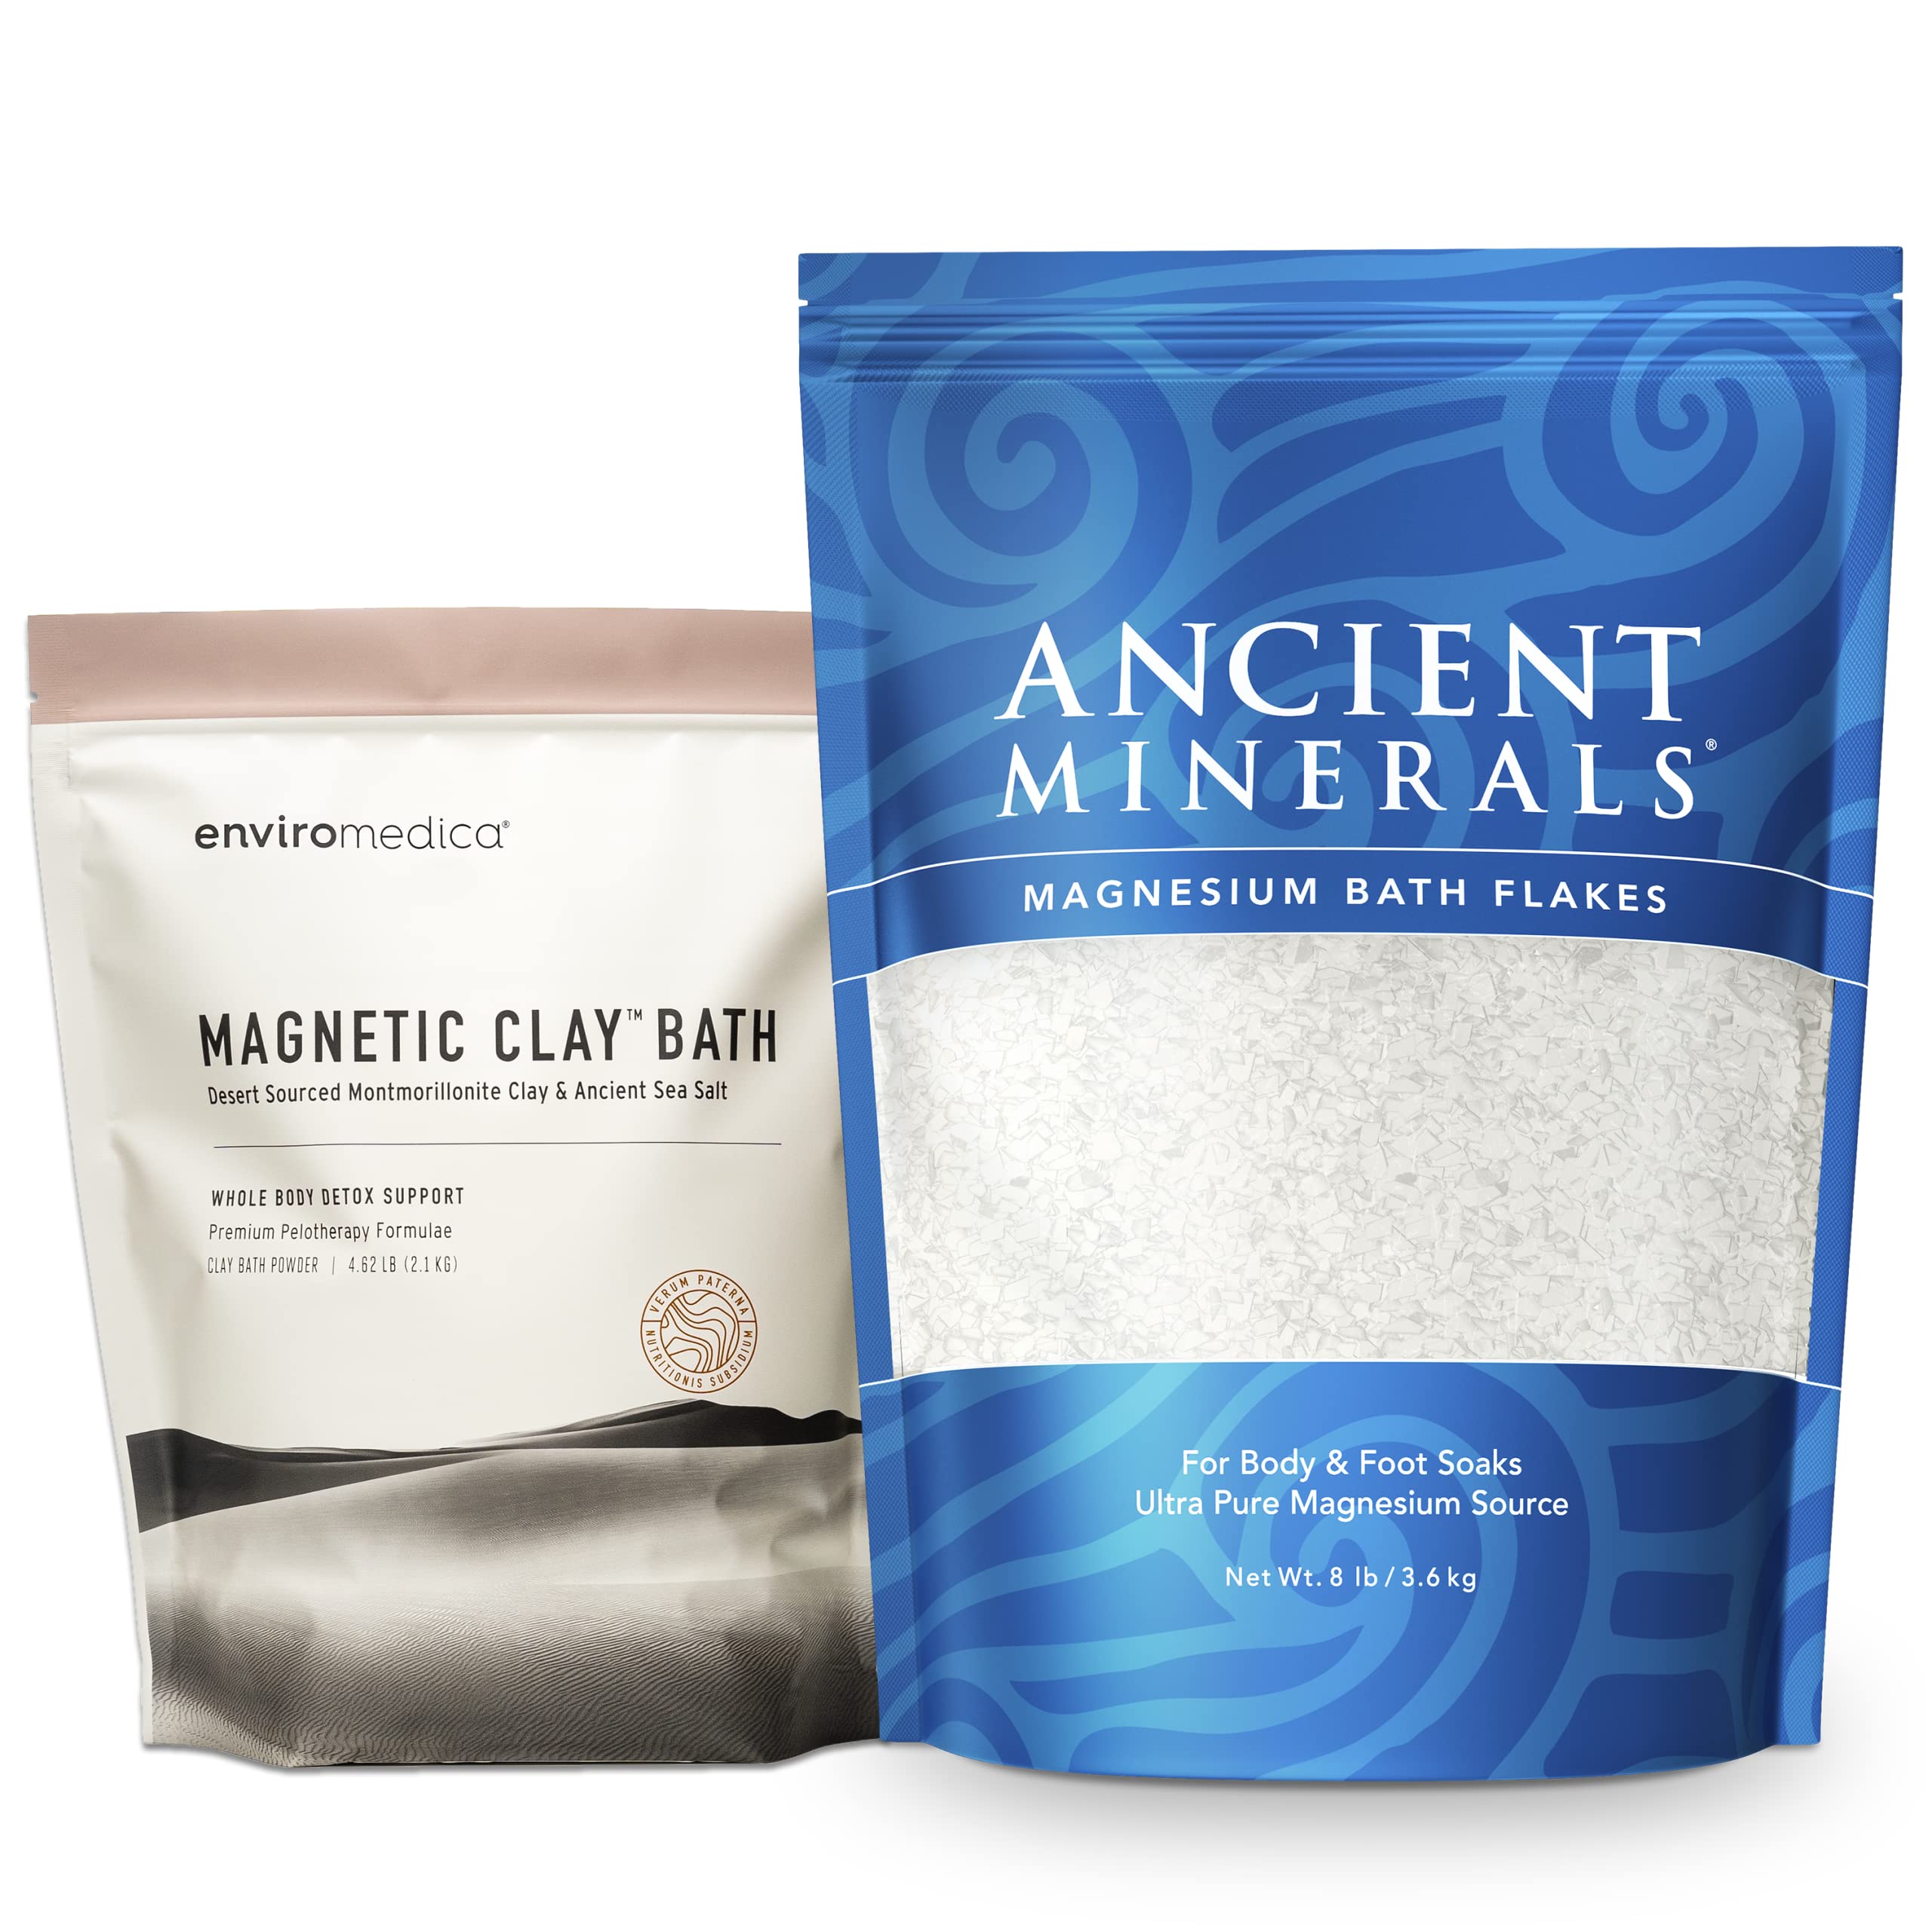 Ancient Minerals Magnesium Bath Flakes - Enviromedica Magnetic Clay - Pure Genuine Zechstein Chloride - Natural Detox with Sodium and Calcium Bentonite Clay Powder